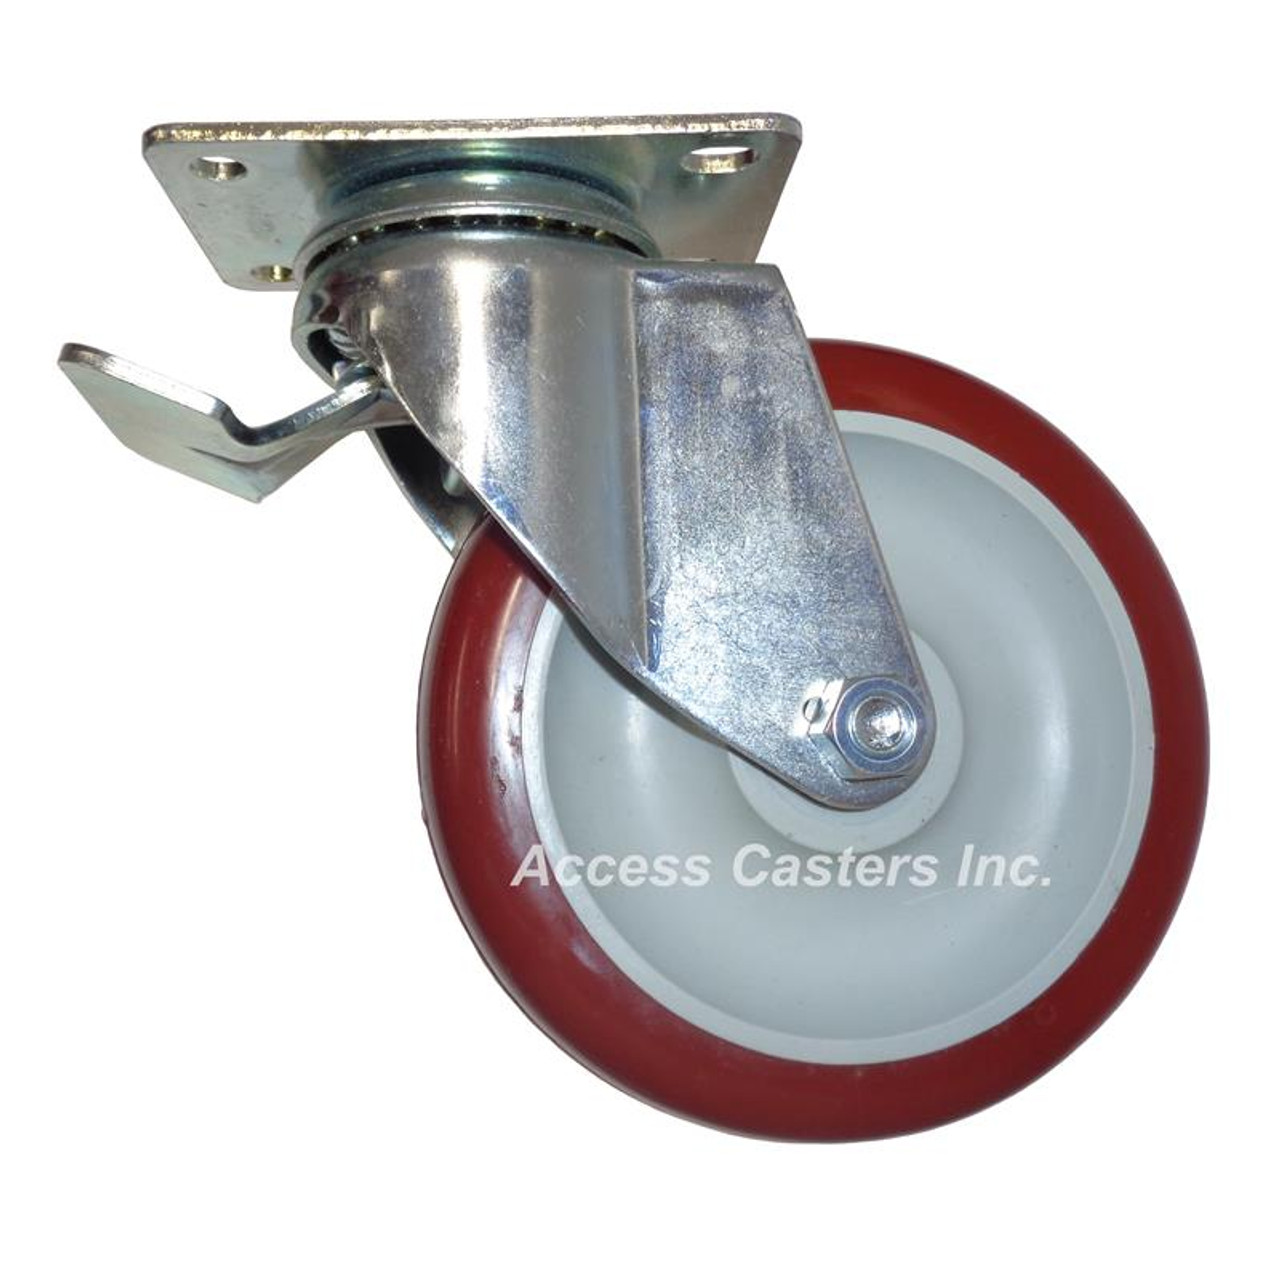 5" Total Lock Caster with Red Polyyurethane Tread Wheel